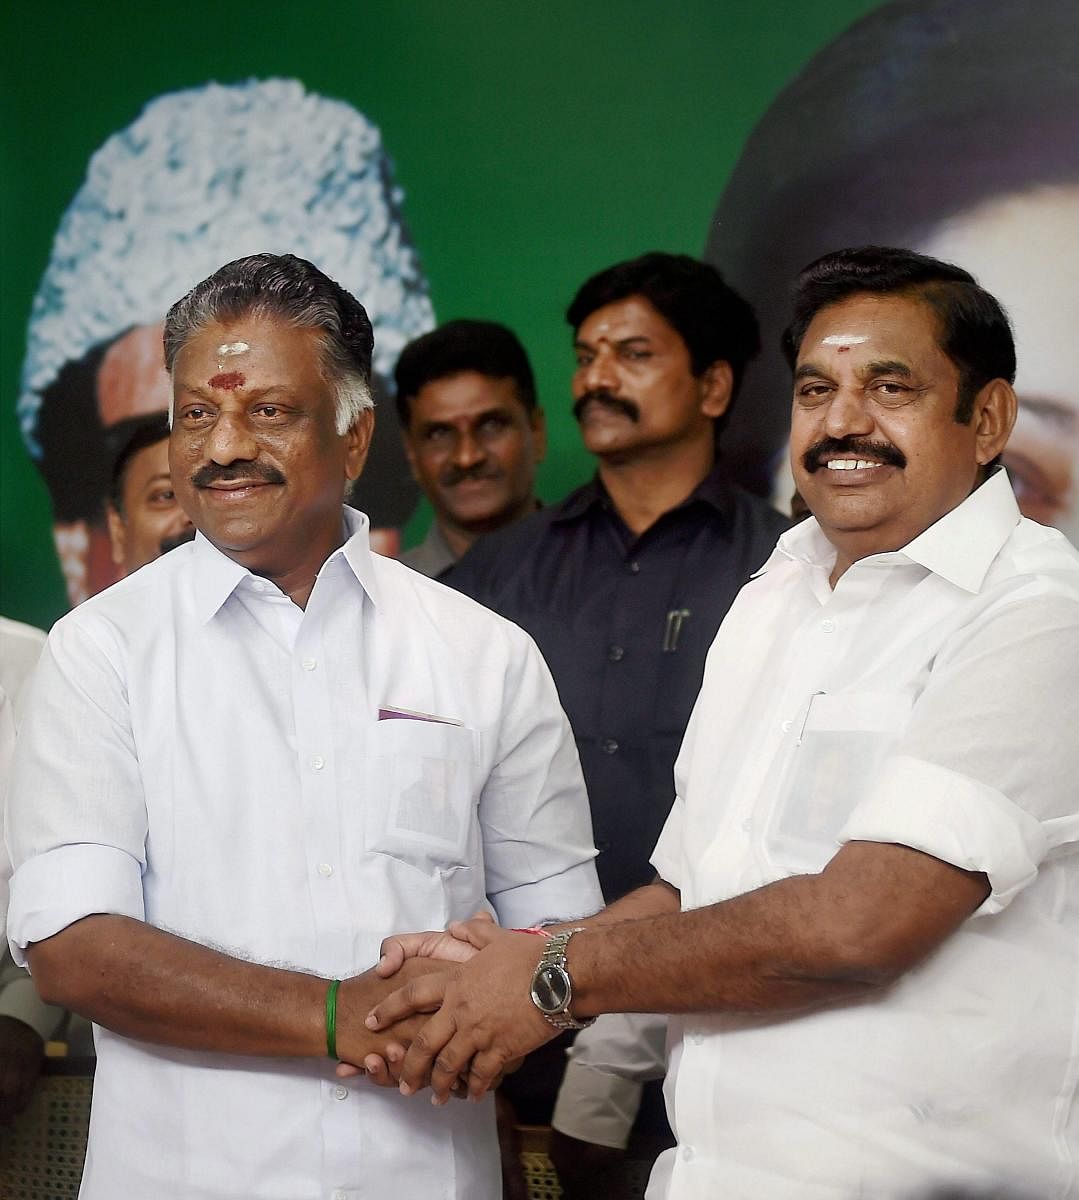 Chennai: Tamil Nadu Chief Minister K Palaniswami (R) and O Panneerselvam exchange greetings following merger of their factions in Chennai on Monday. All India Anna Dravida Munnetra Kazhagam factions led by Chief Minister Edappadi K Palaniswamy and former Chief Minister O Panneerselvam formally merged following a power sharing arrangement with the former to remain as Chief Minister and the latter his deputy. PTI Photo by R Senthil Kumar (PTI8_21_2017_000118B)